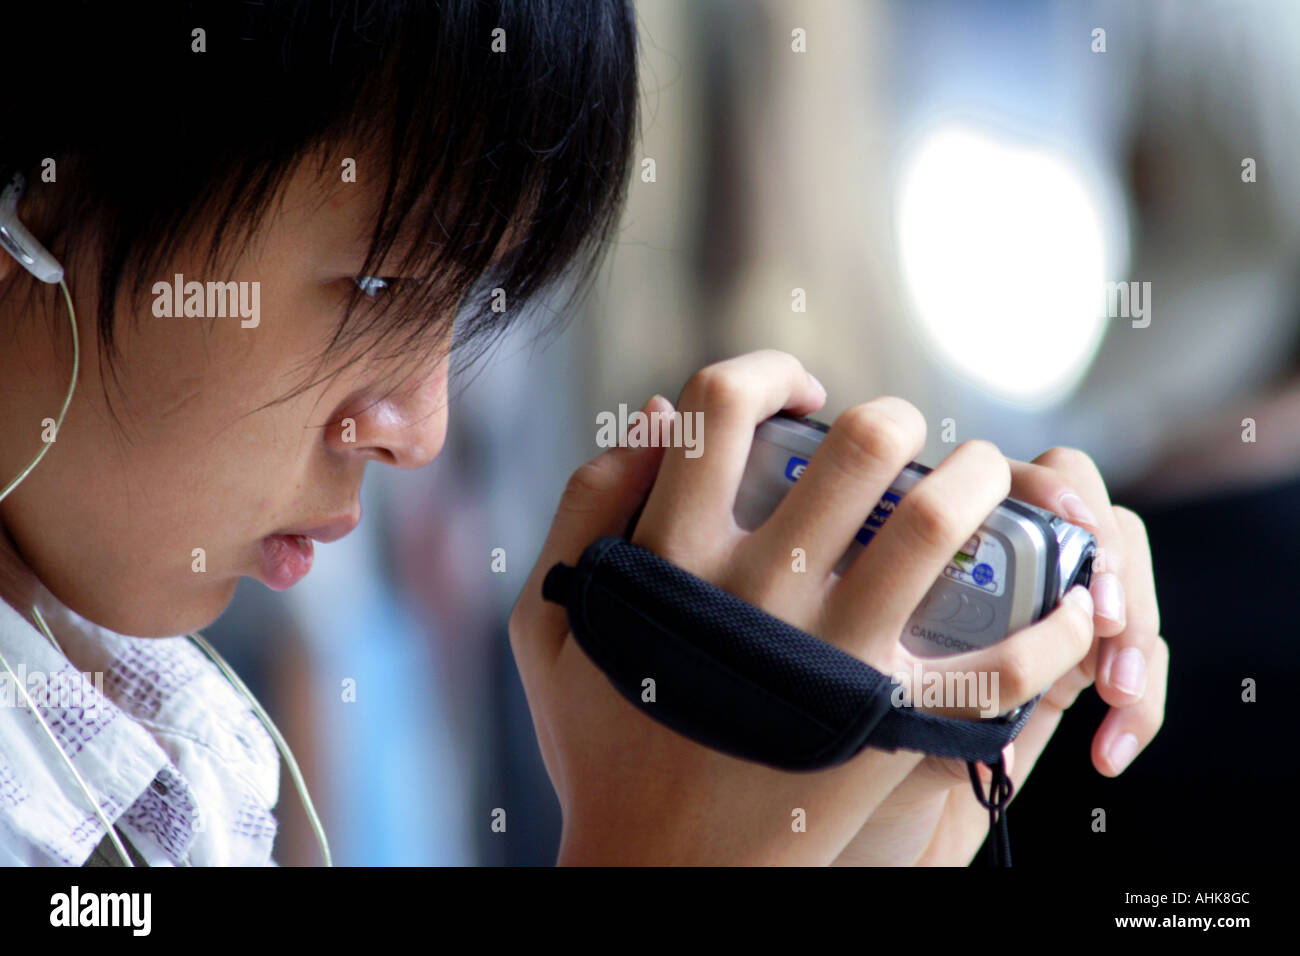 Asian Teenager Wearing Headphones and Using a Digital Camcorder, Video Recorder Stock Photo